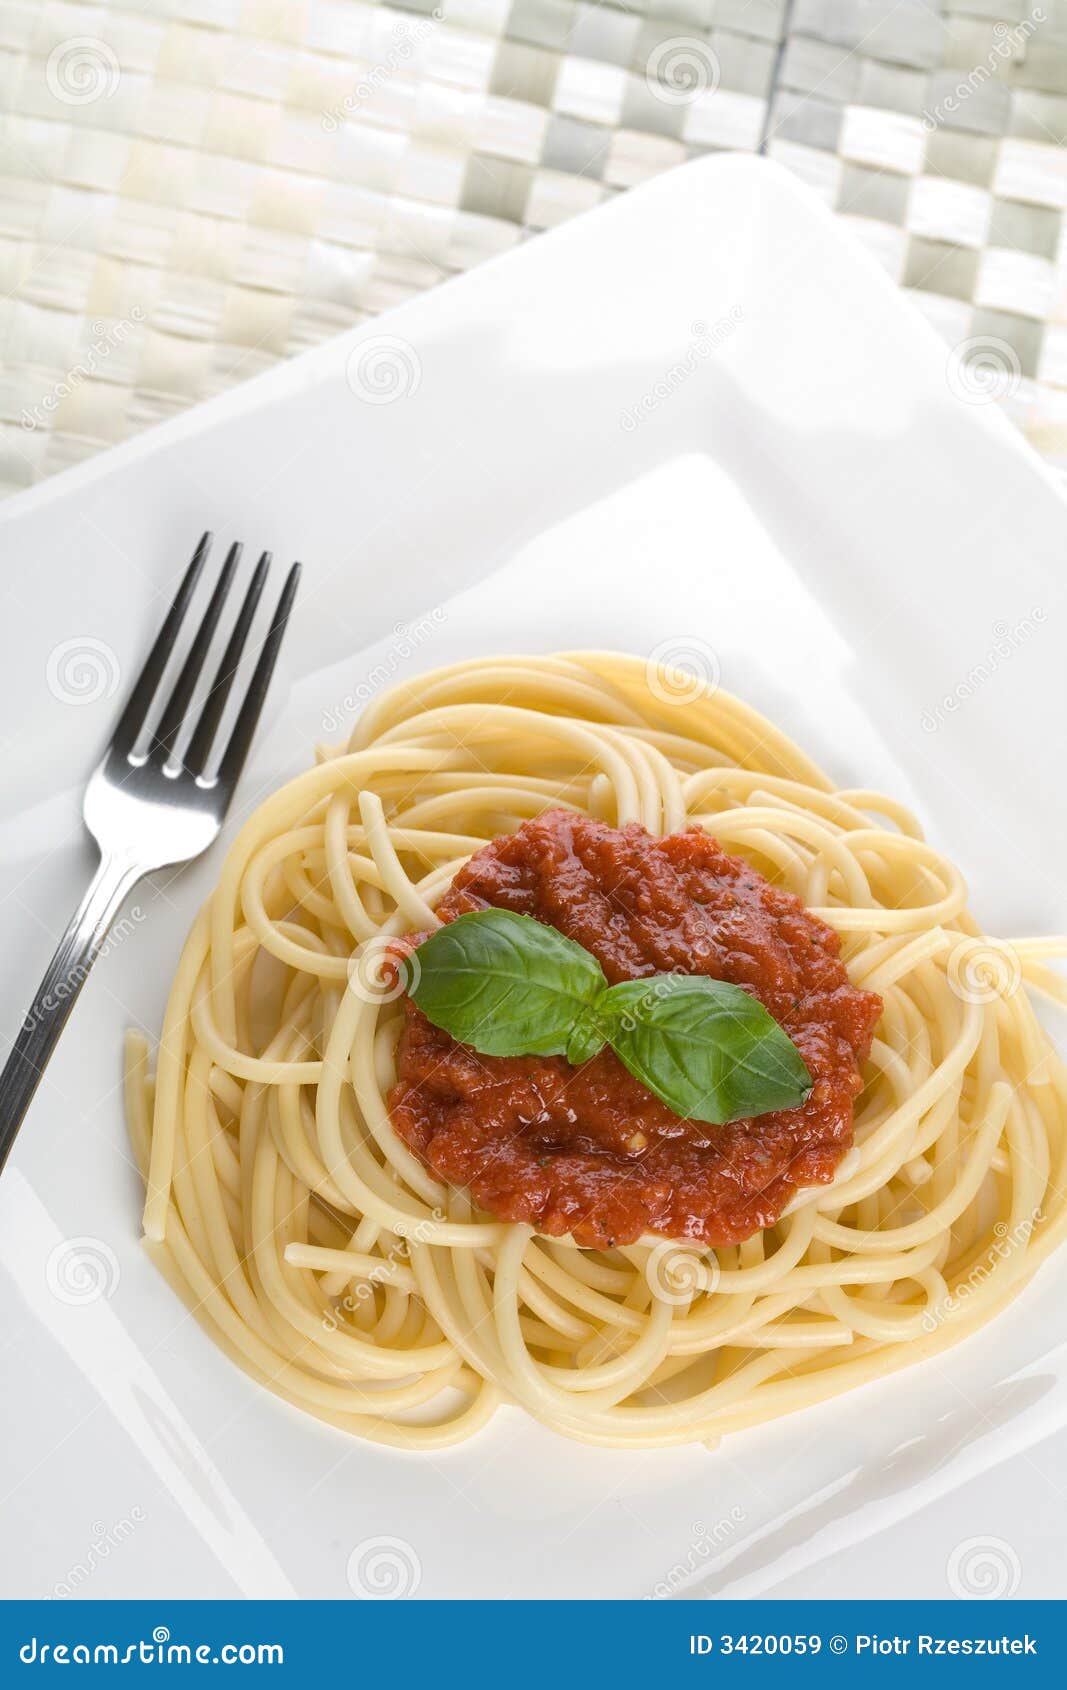 Spaghetti dinner stock image. Image of cheese, lifes, dinner - 3420059